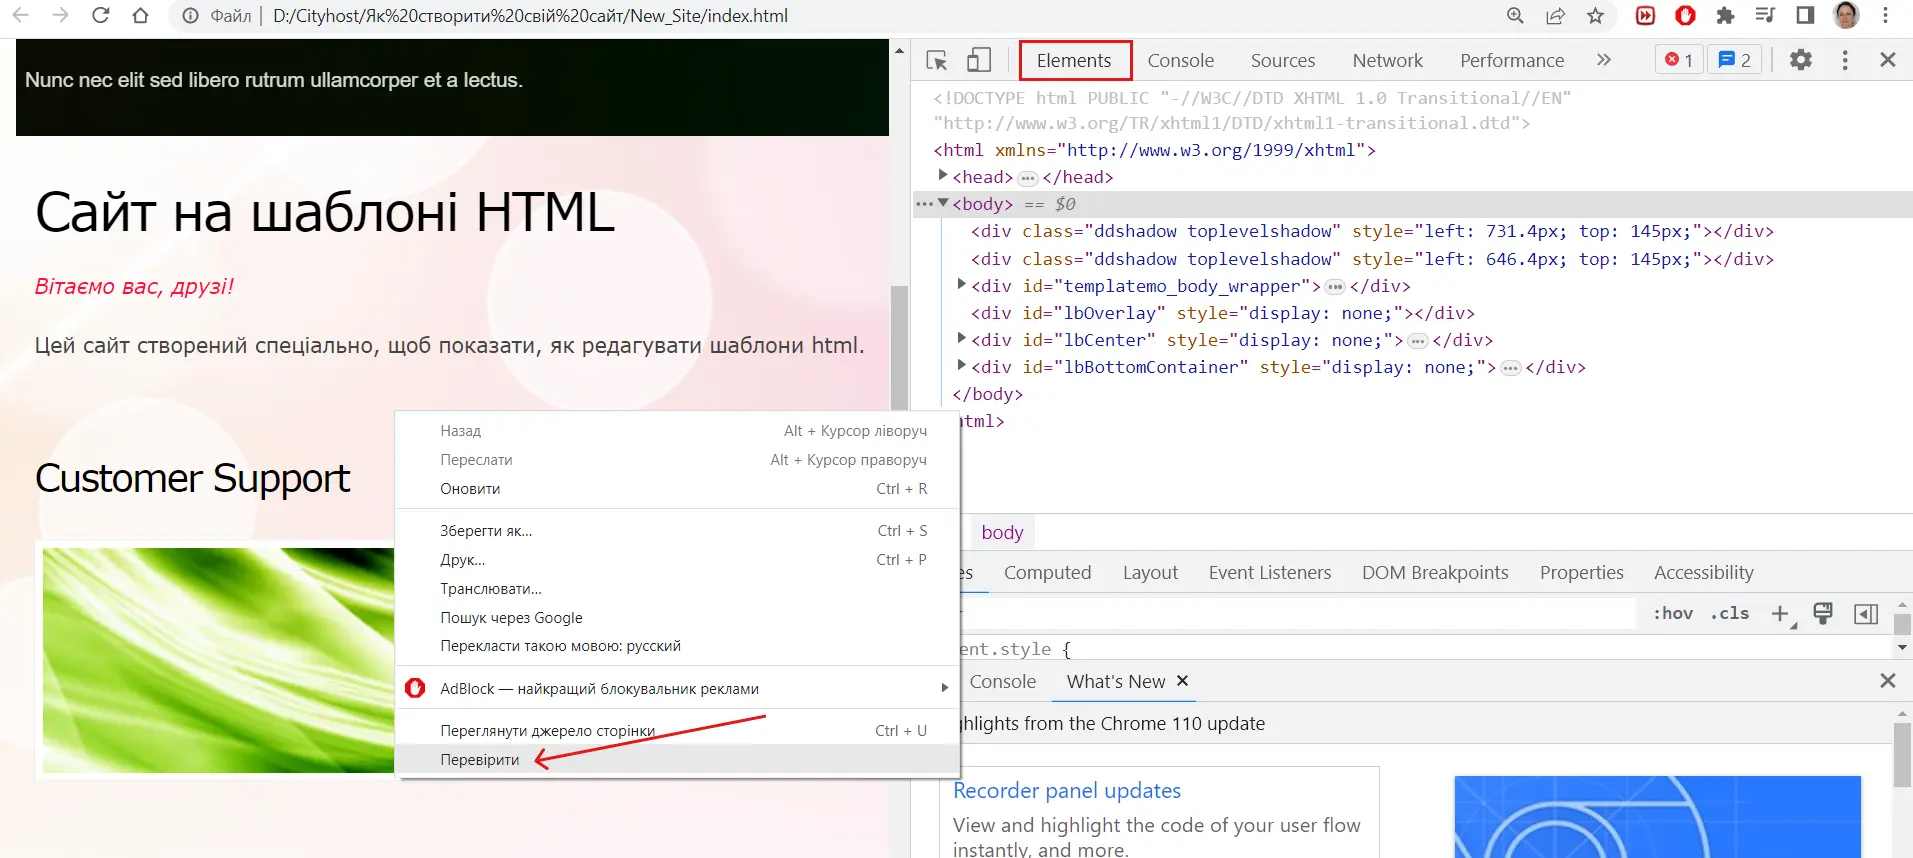 How to open developer tools in Chrome